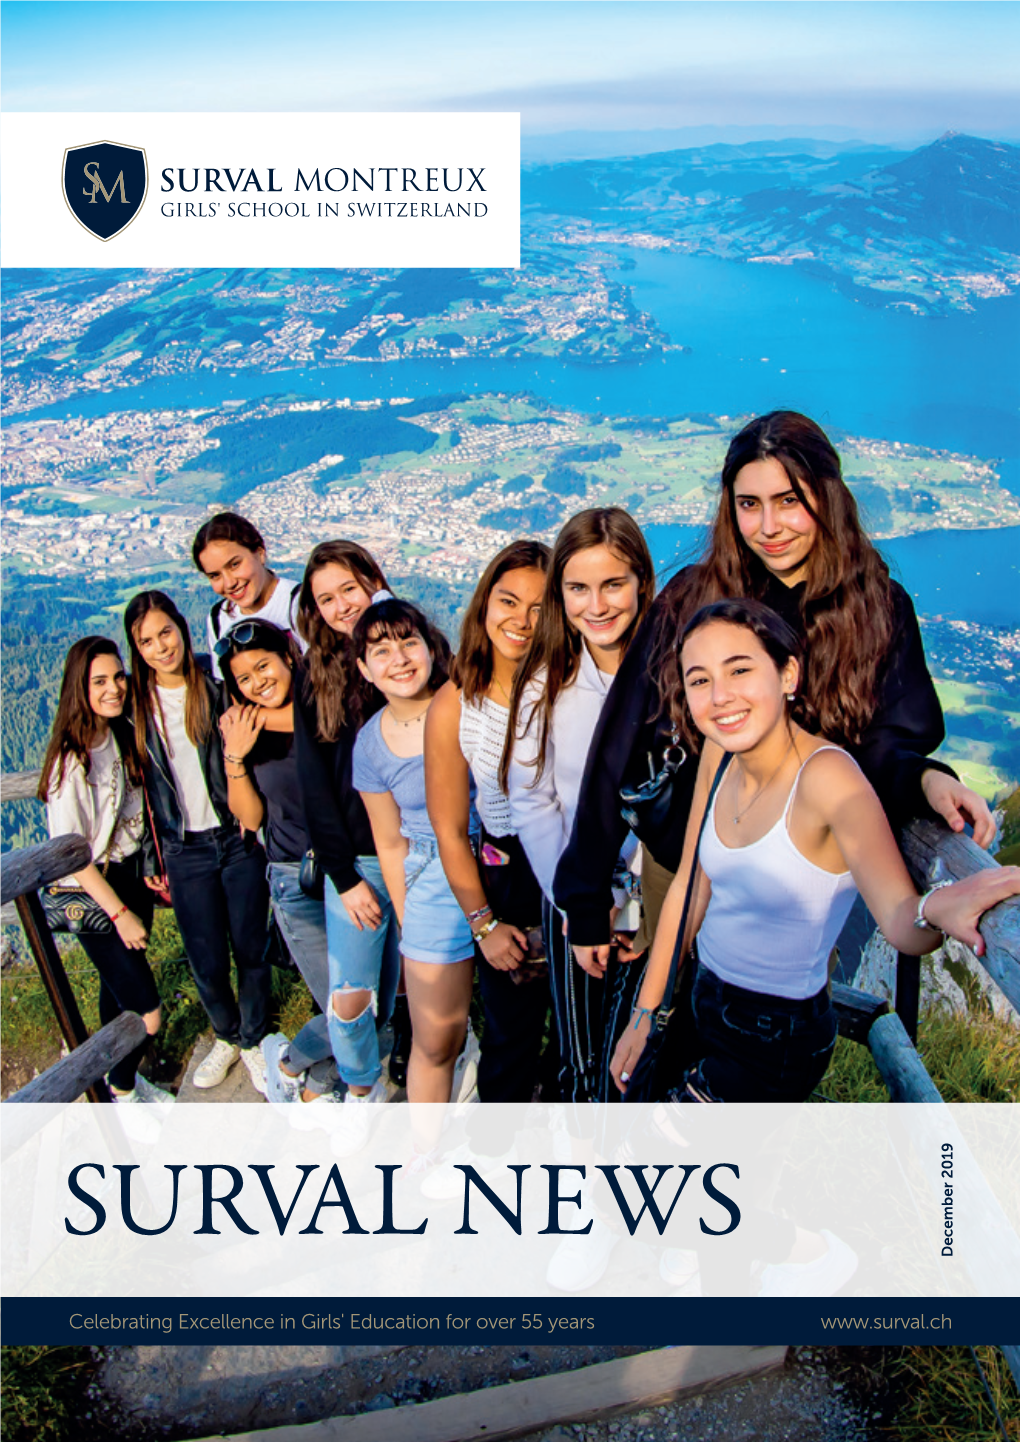 Surval News with You, Bursting with Tales of Learning and Discovery, in the Classroom and Beyond